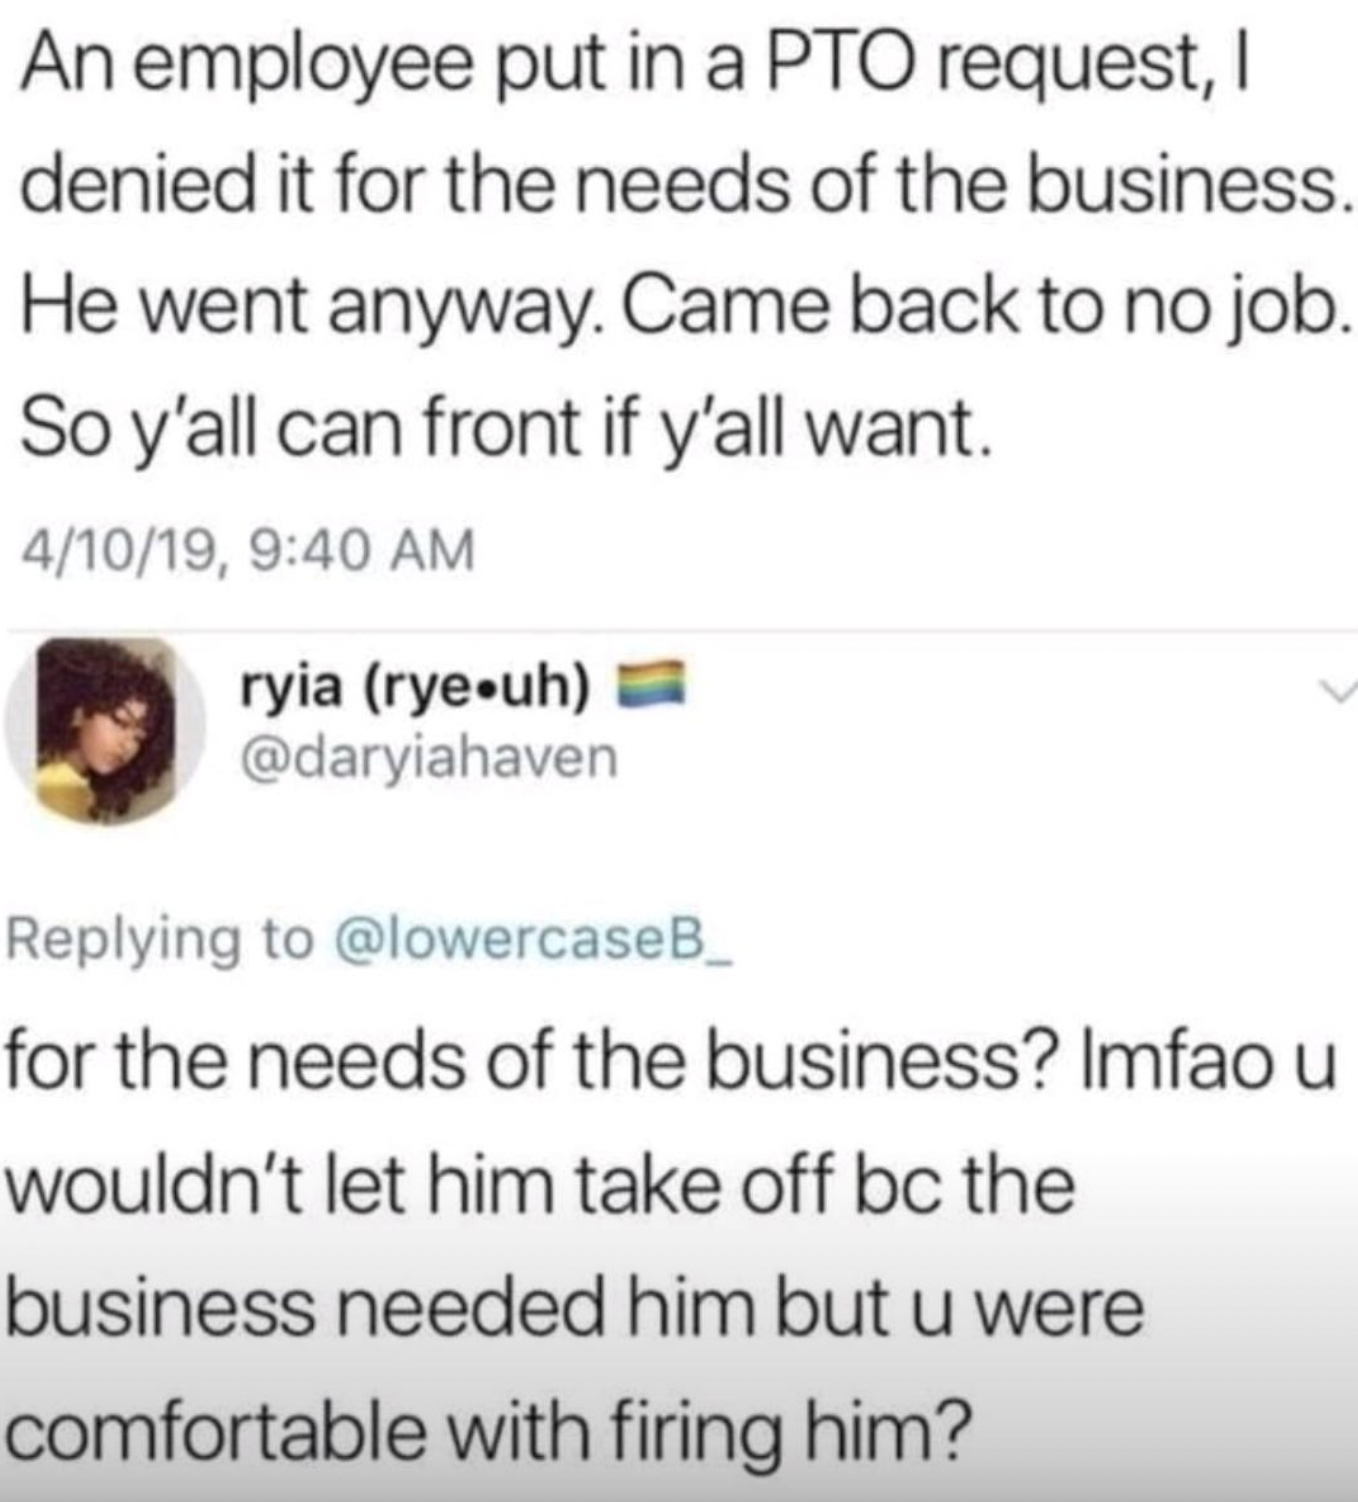 screenshot - An employee put in a Pto request, I denied it for the needs of the business. He went anyway. Came back to no job. So y'all can front if y'all want. 41019, ryia rye uh for the needs of the business? Imfao u wouldn't let him take off bc the bus